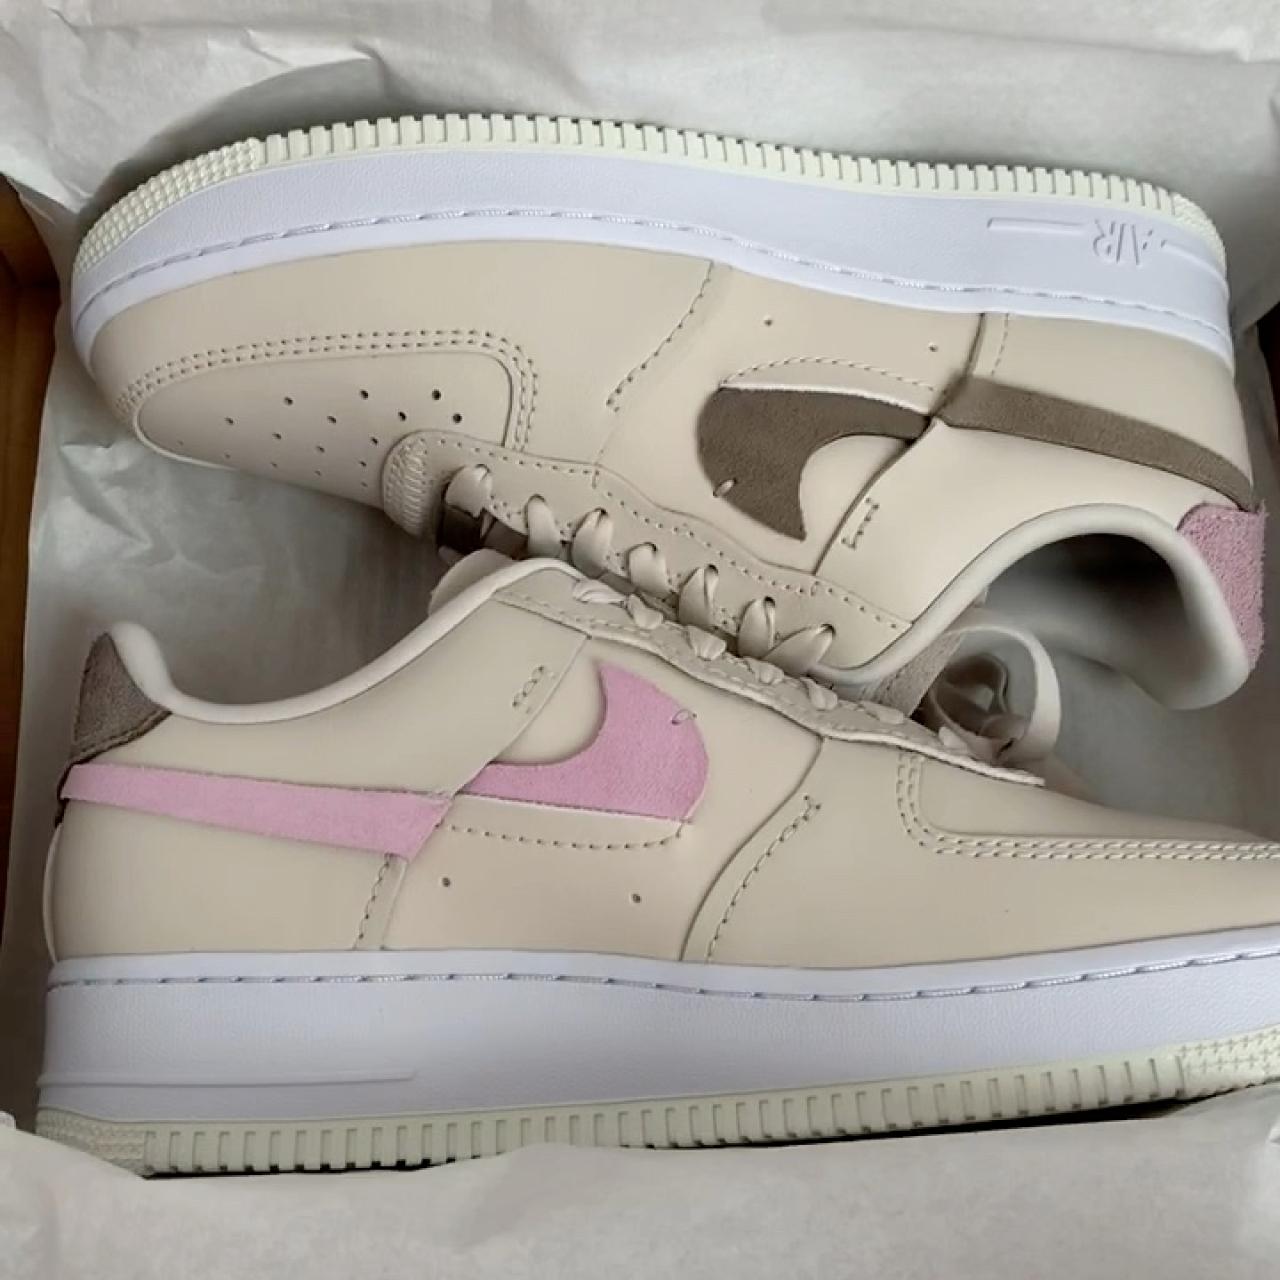 air force 1 07 light orewood artic pink